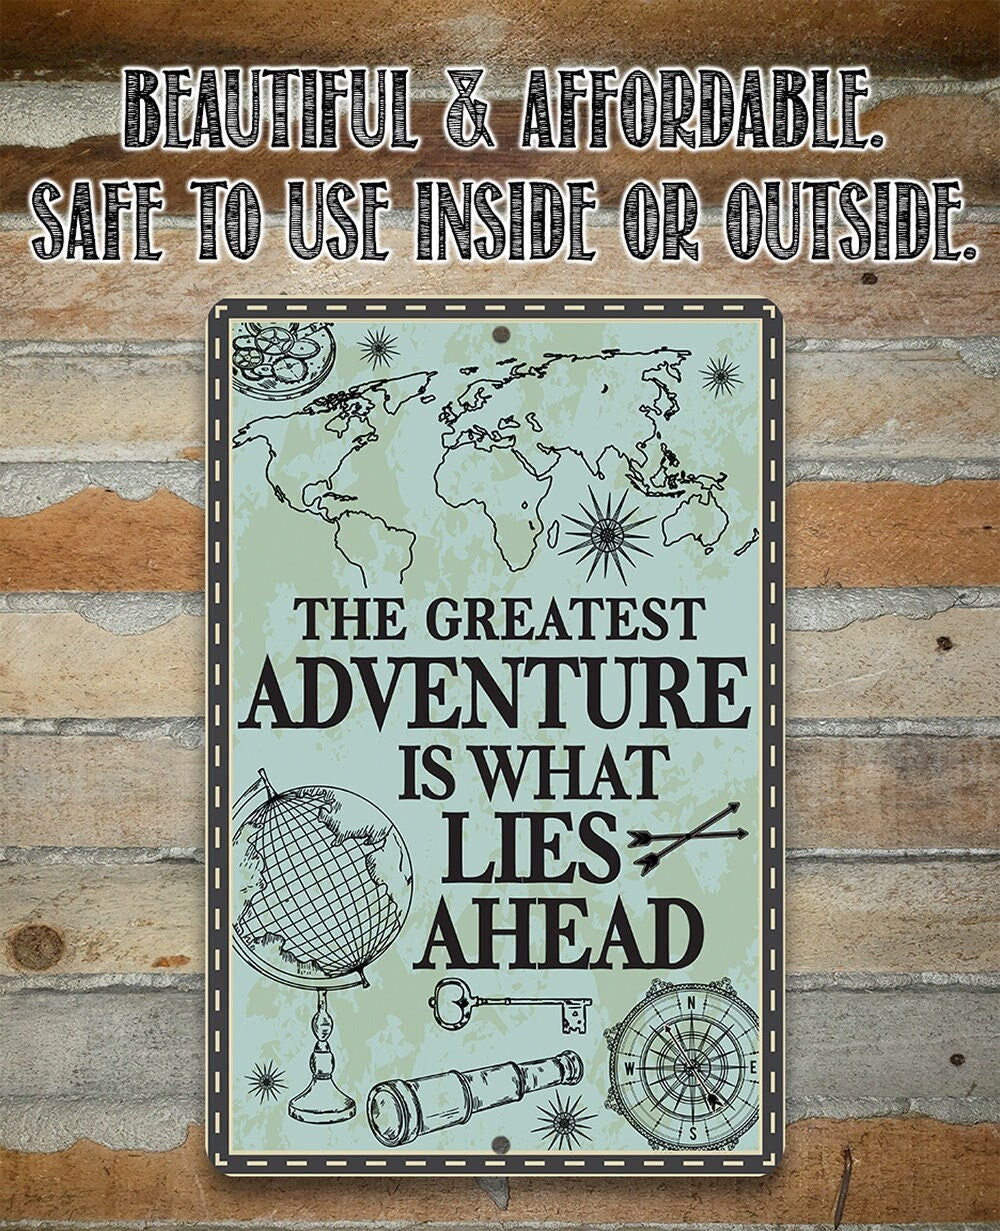 The Greatest Adventure is What Lies Ahead - Metal Sign Metal Sign Lone Star Art 